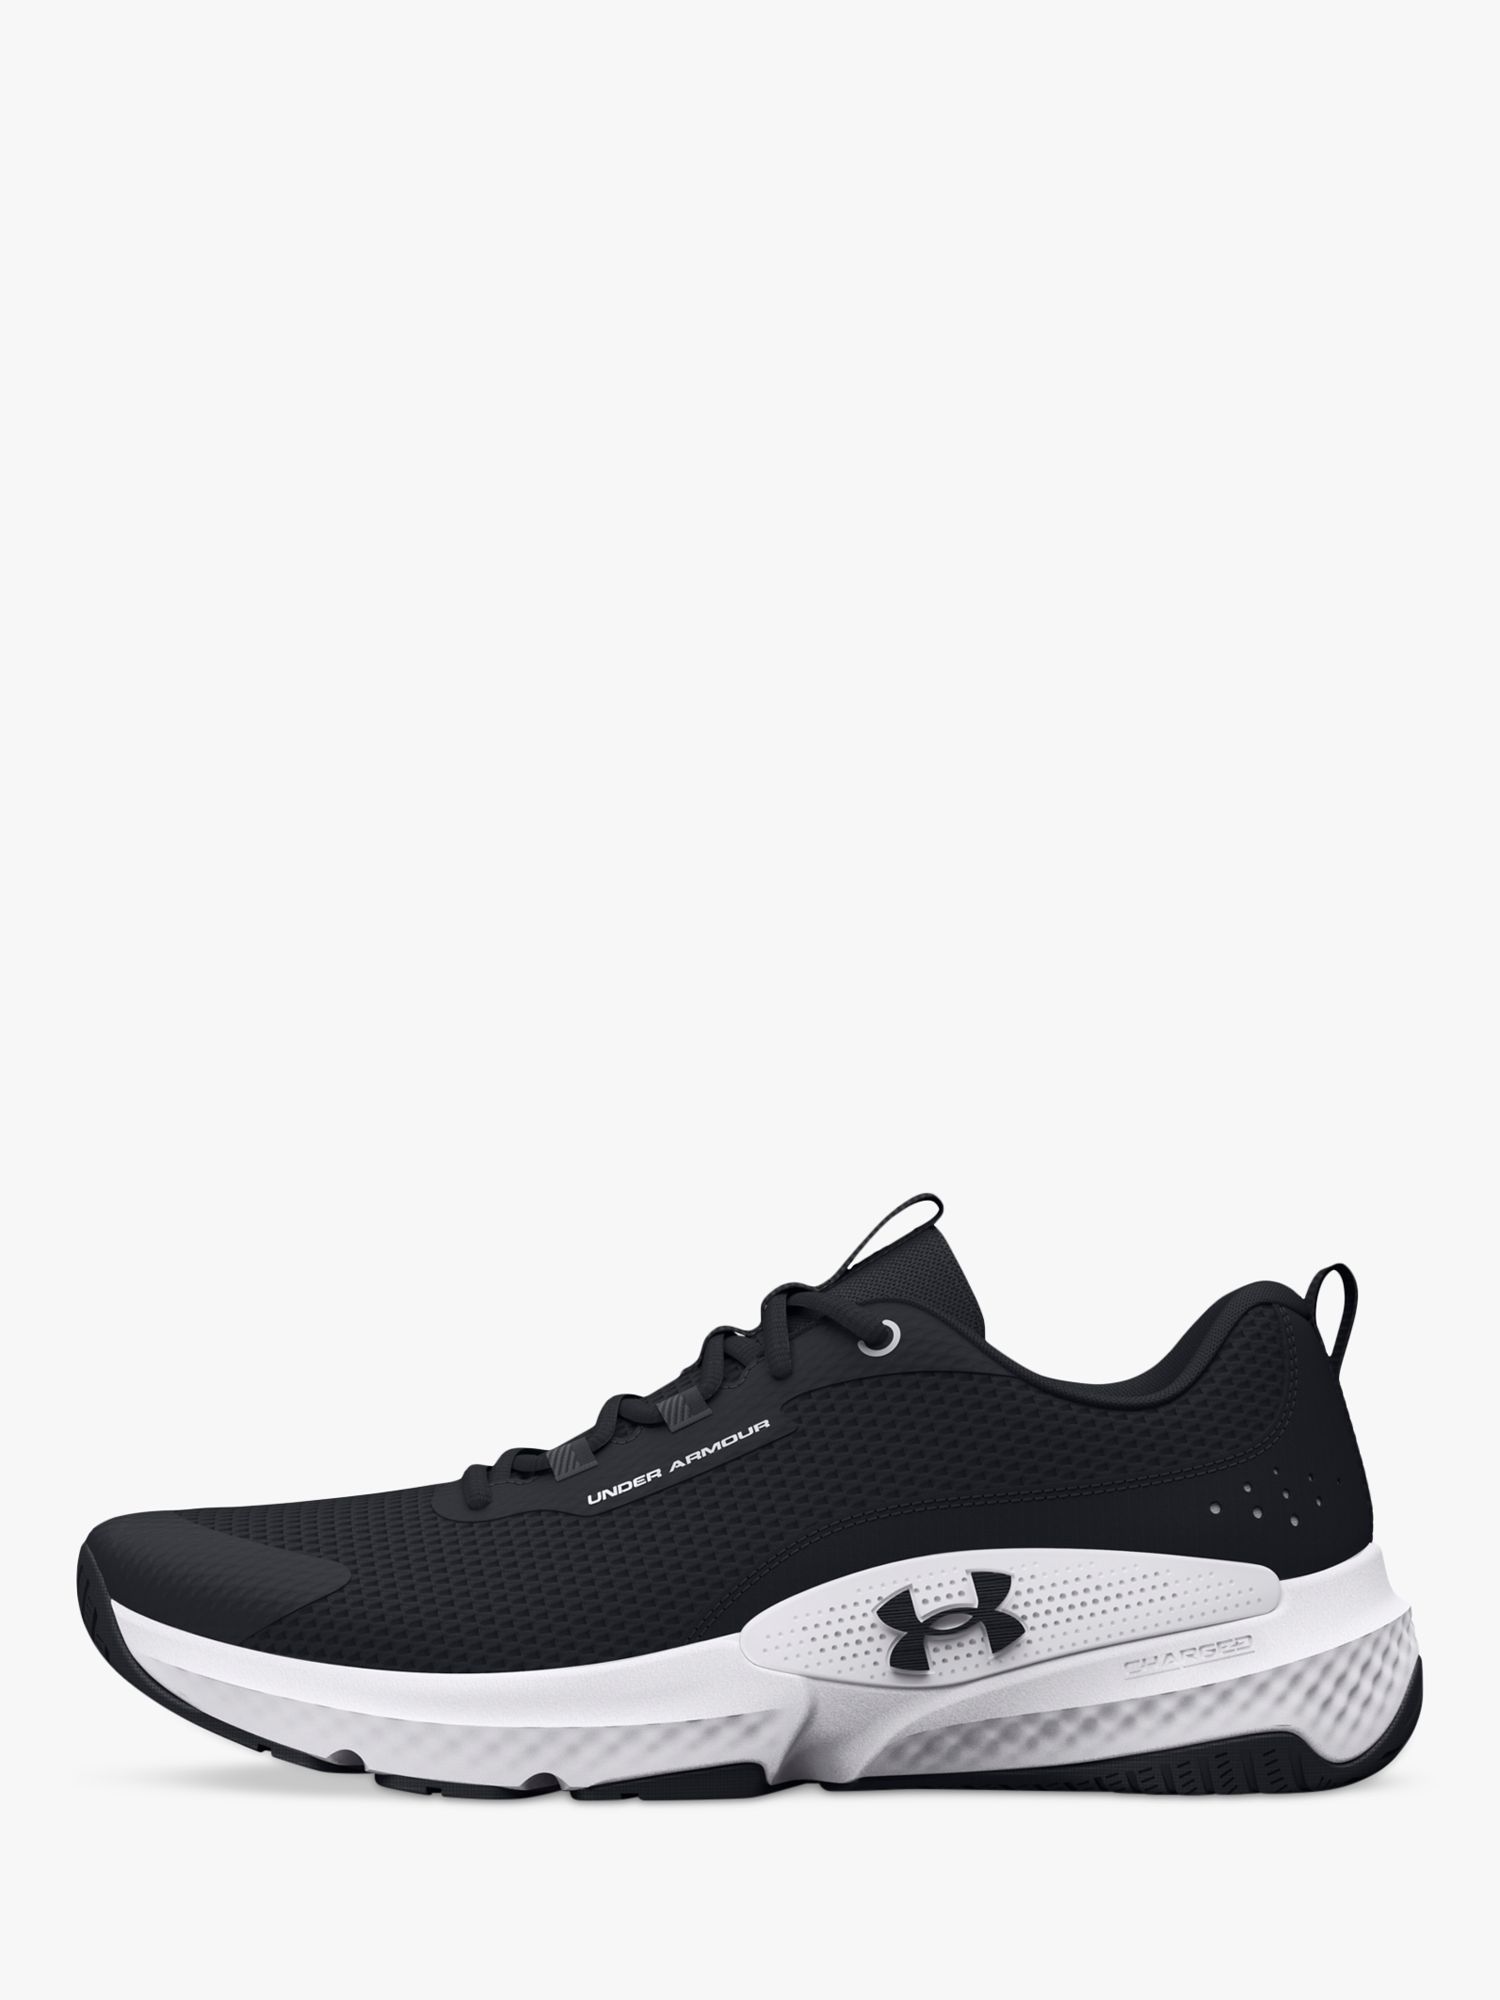 Under Armour Dynamic Select Women's Cross Trainers, Black/White/Black, 6